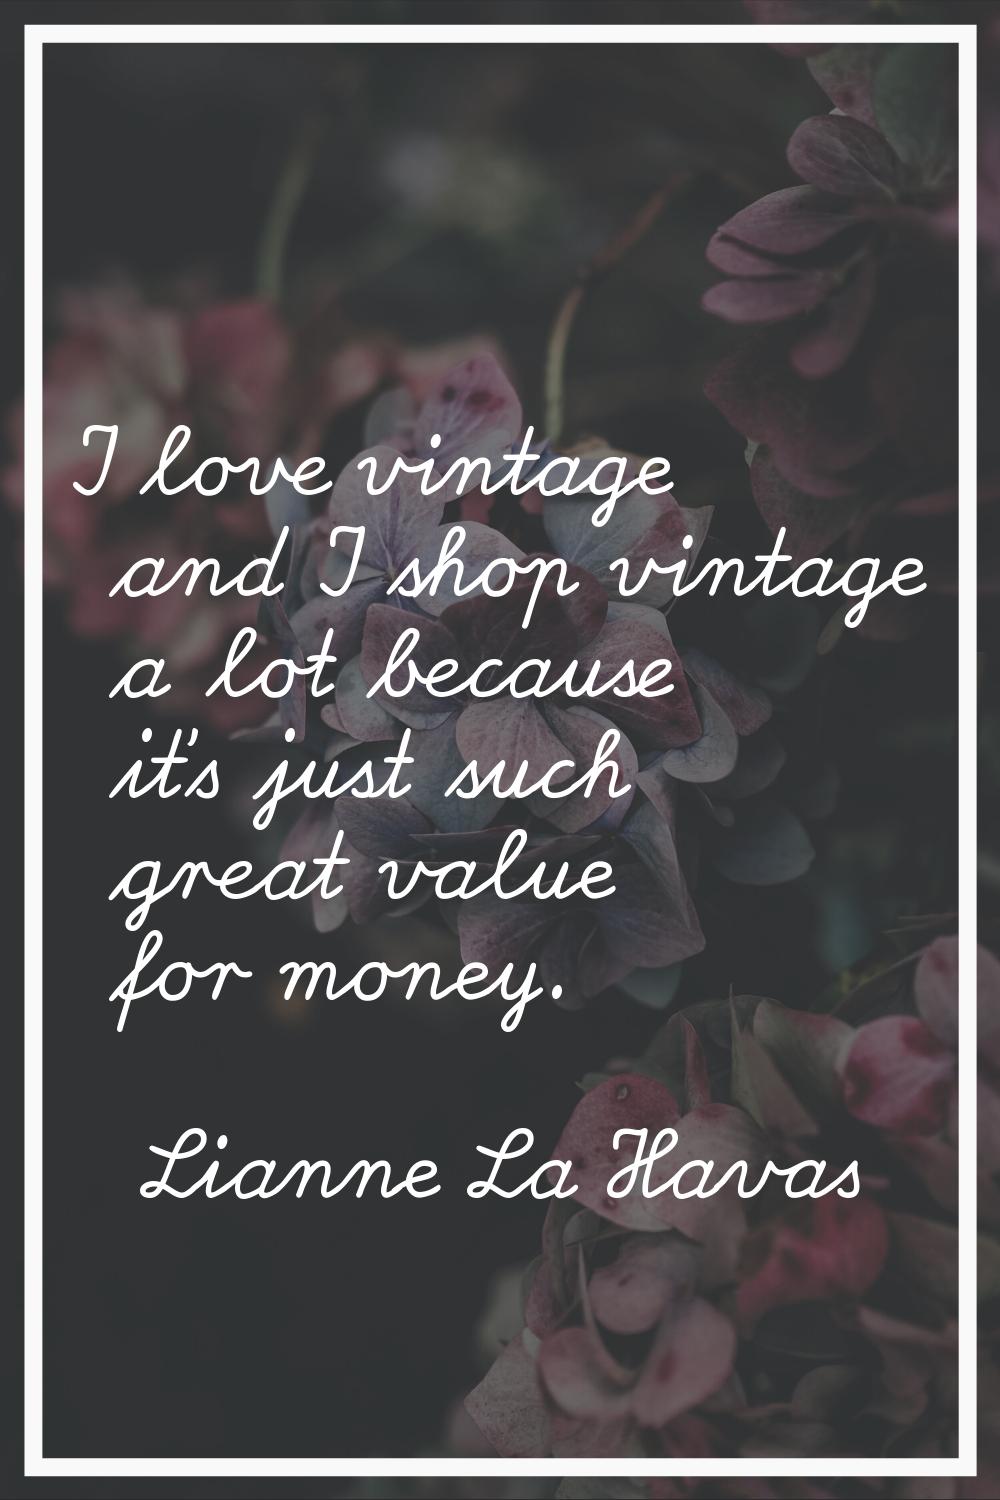 I love vintage and I shop vintage a lot because it's just such great value for money.